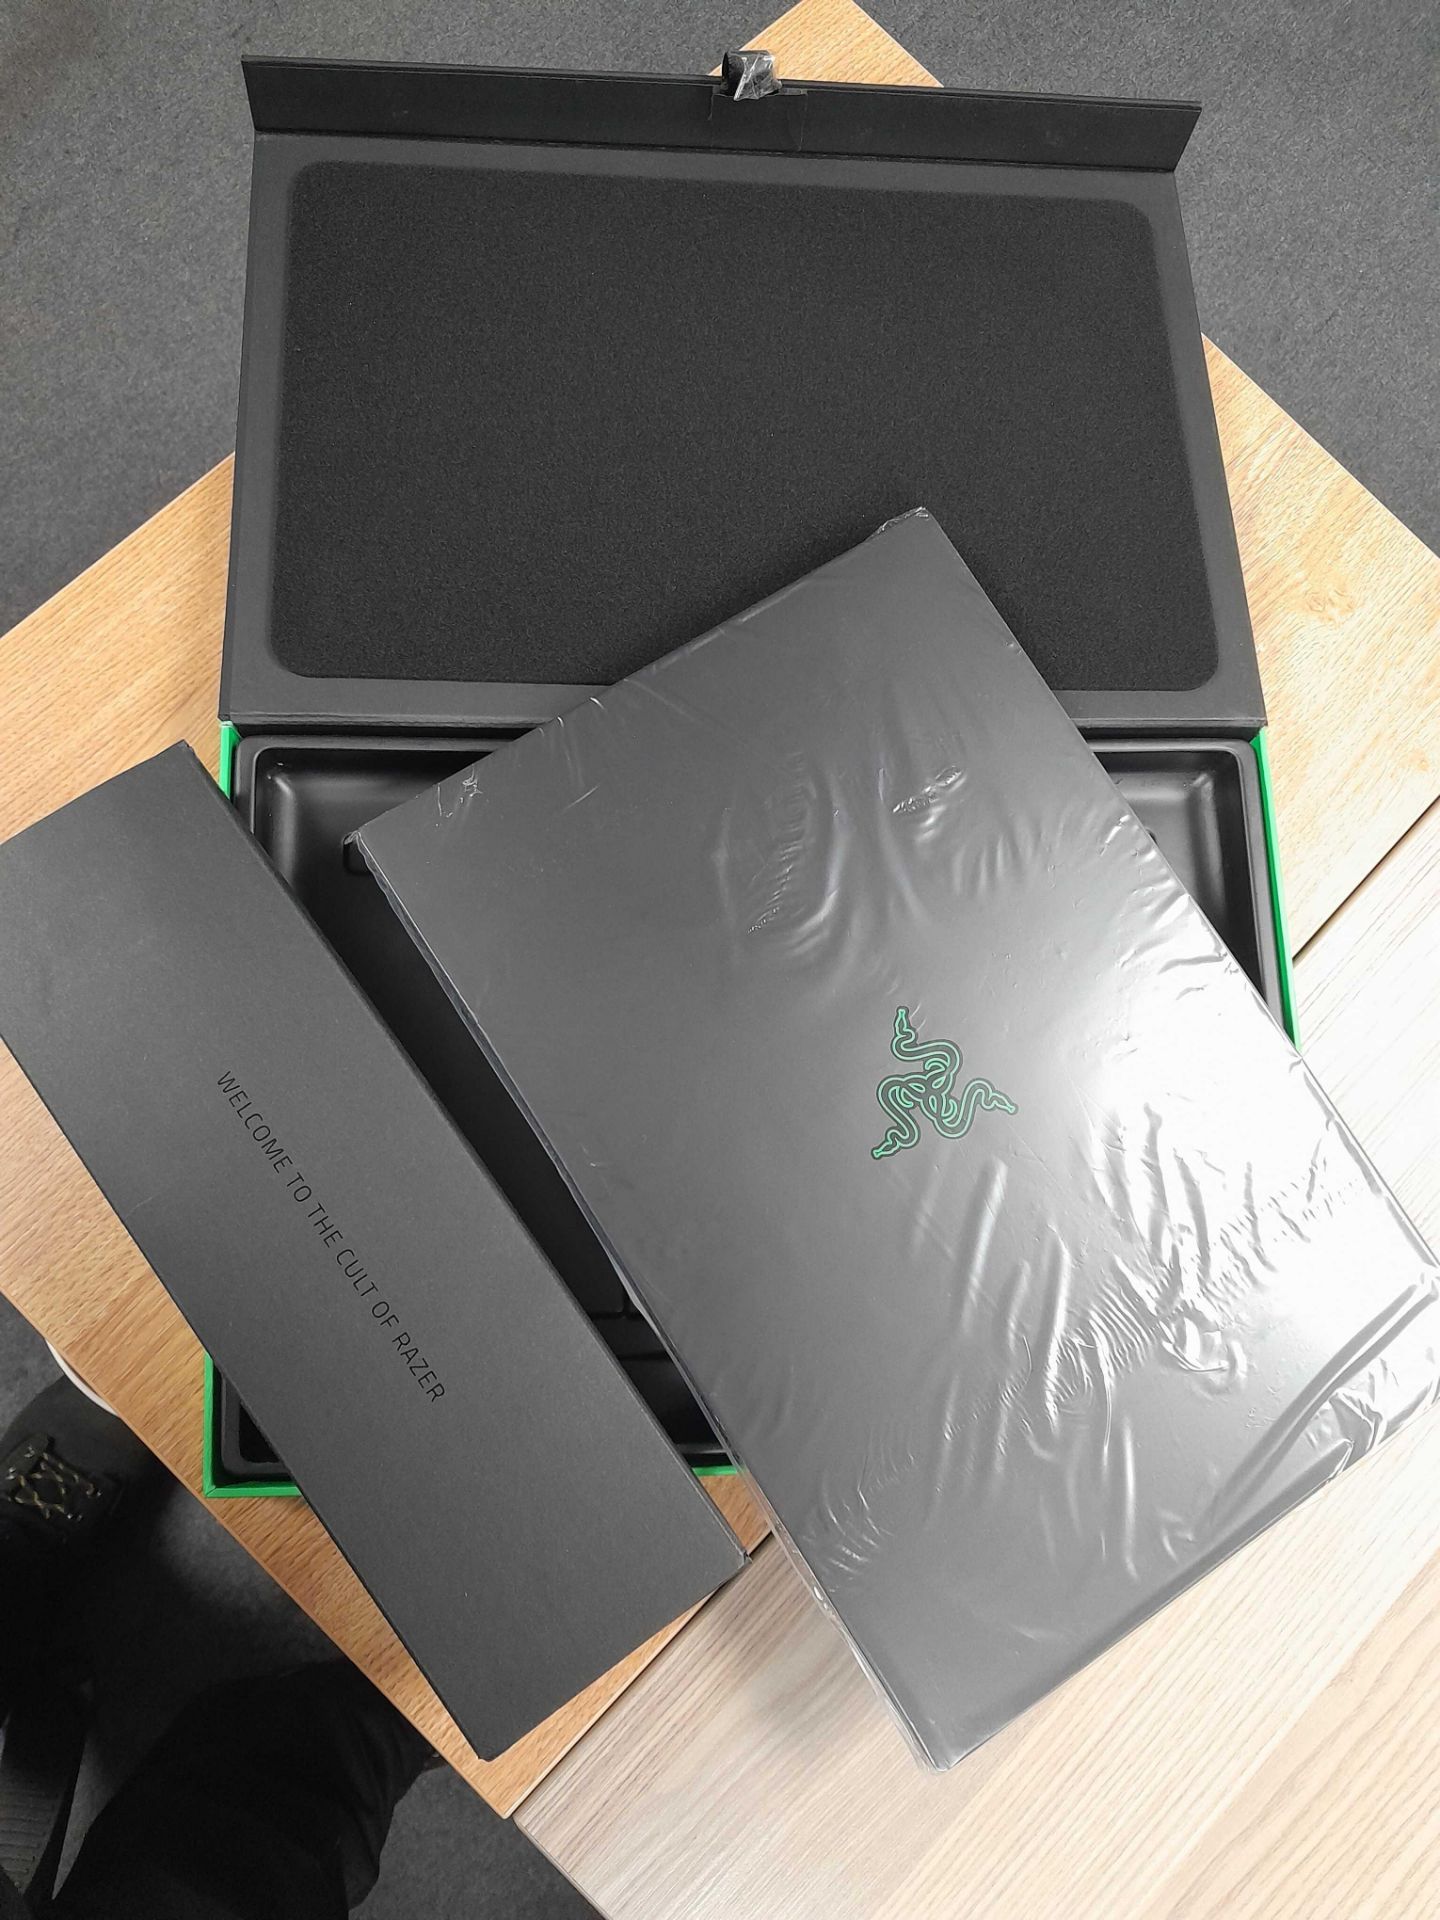 RRP £2300 Razer The New Blade 15 Advanced Gaming Notebook - Image 2 of 4